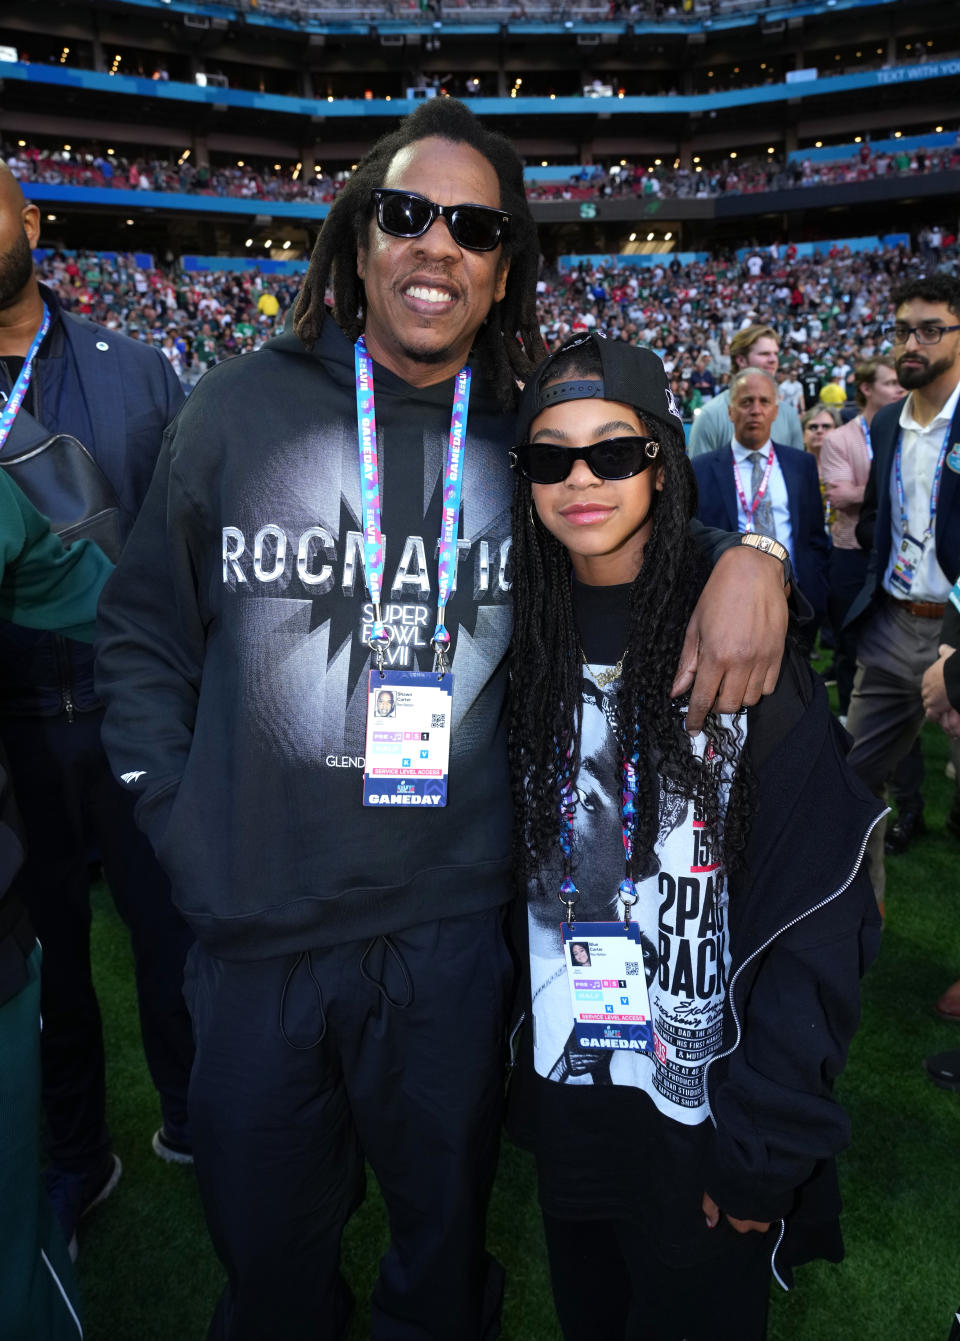 GLENDALE, ARIZONA - FEBRUARY 12:  (L-R) Jay-Z and Blue Ivy Carter attend Super Bowl LVII at State Farm Stadium on February 12, 2023 in Glendale, Arizona. (Photo by Kevin Mazur/Getty Images for Roc Nation)